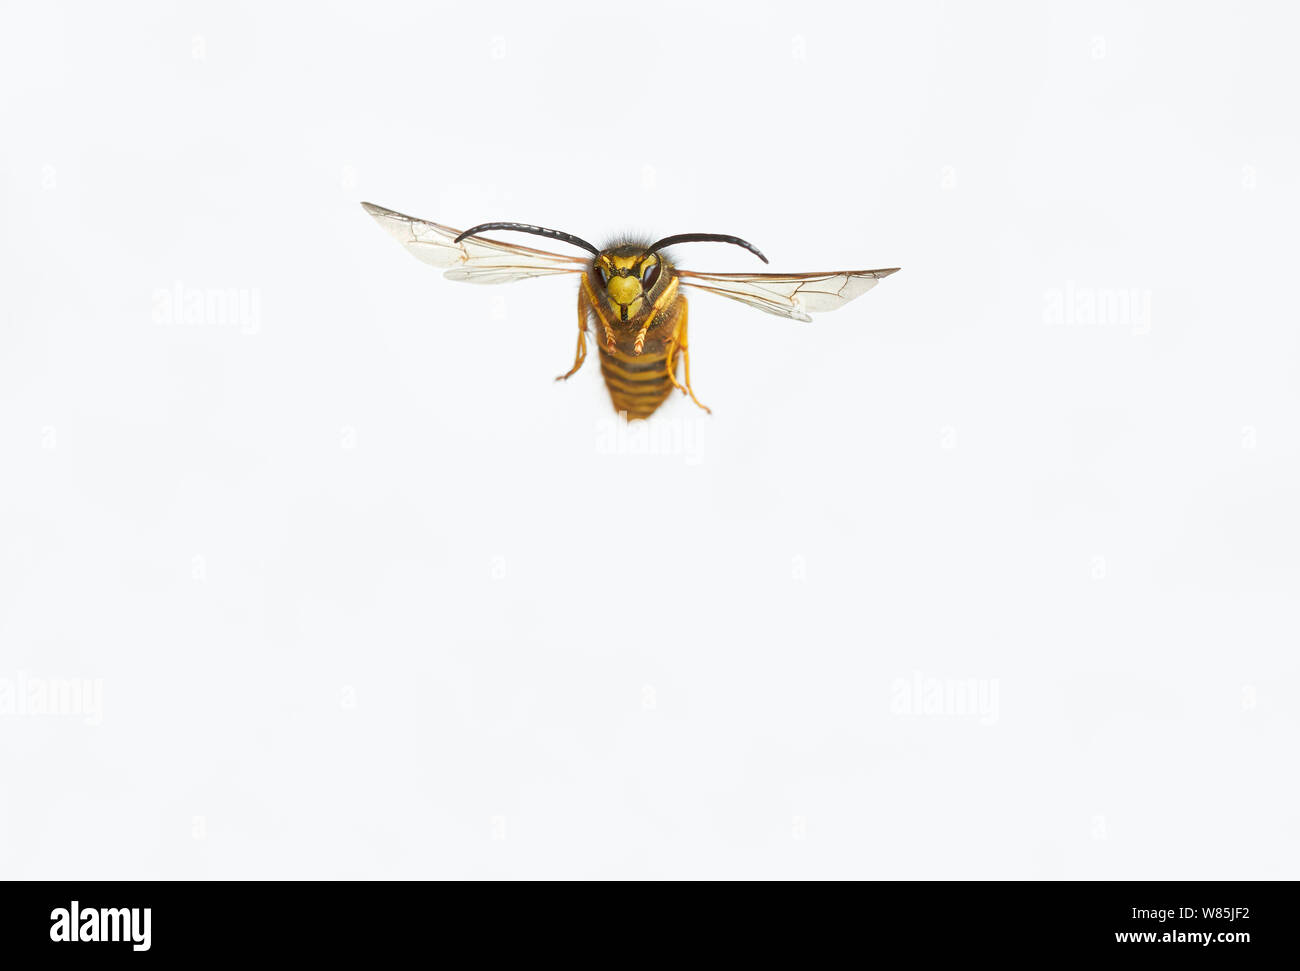 Social wasp (Vespula) in flight against white background, Sussex, England, UK. October. Stock Photo